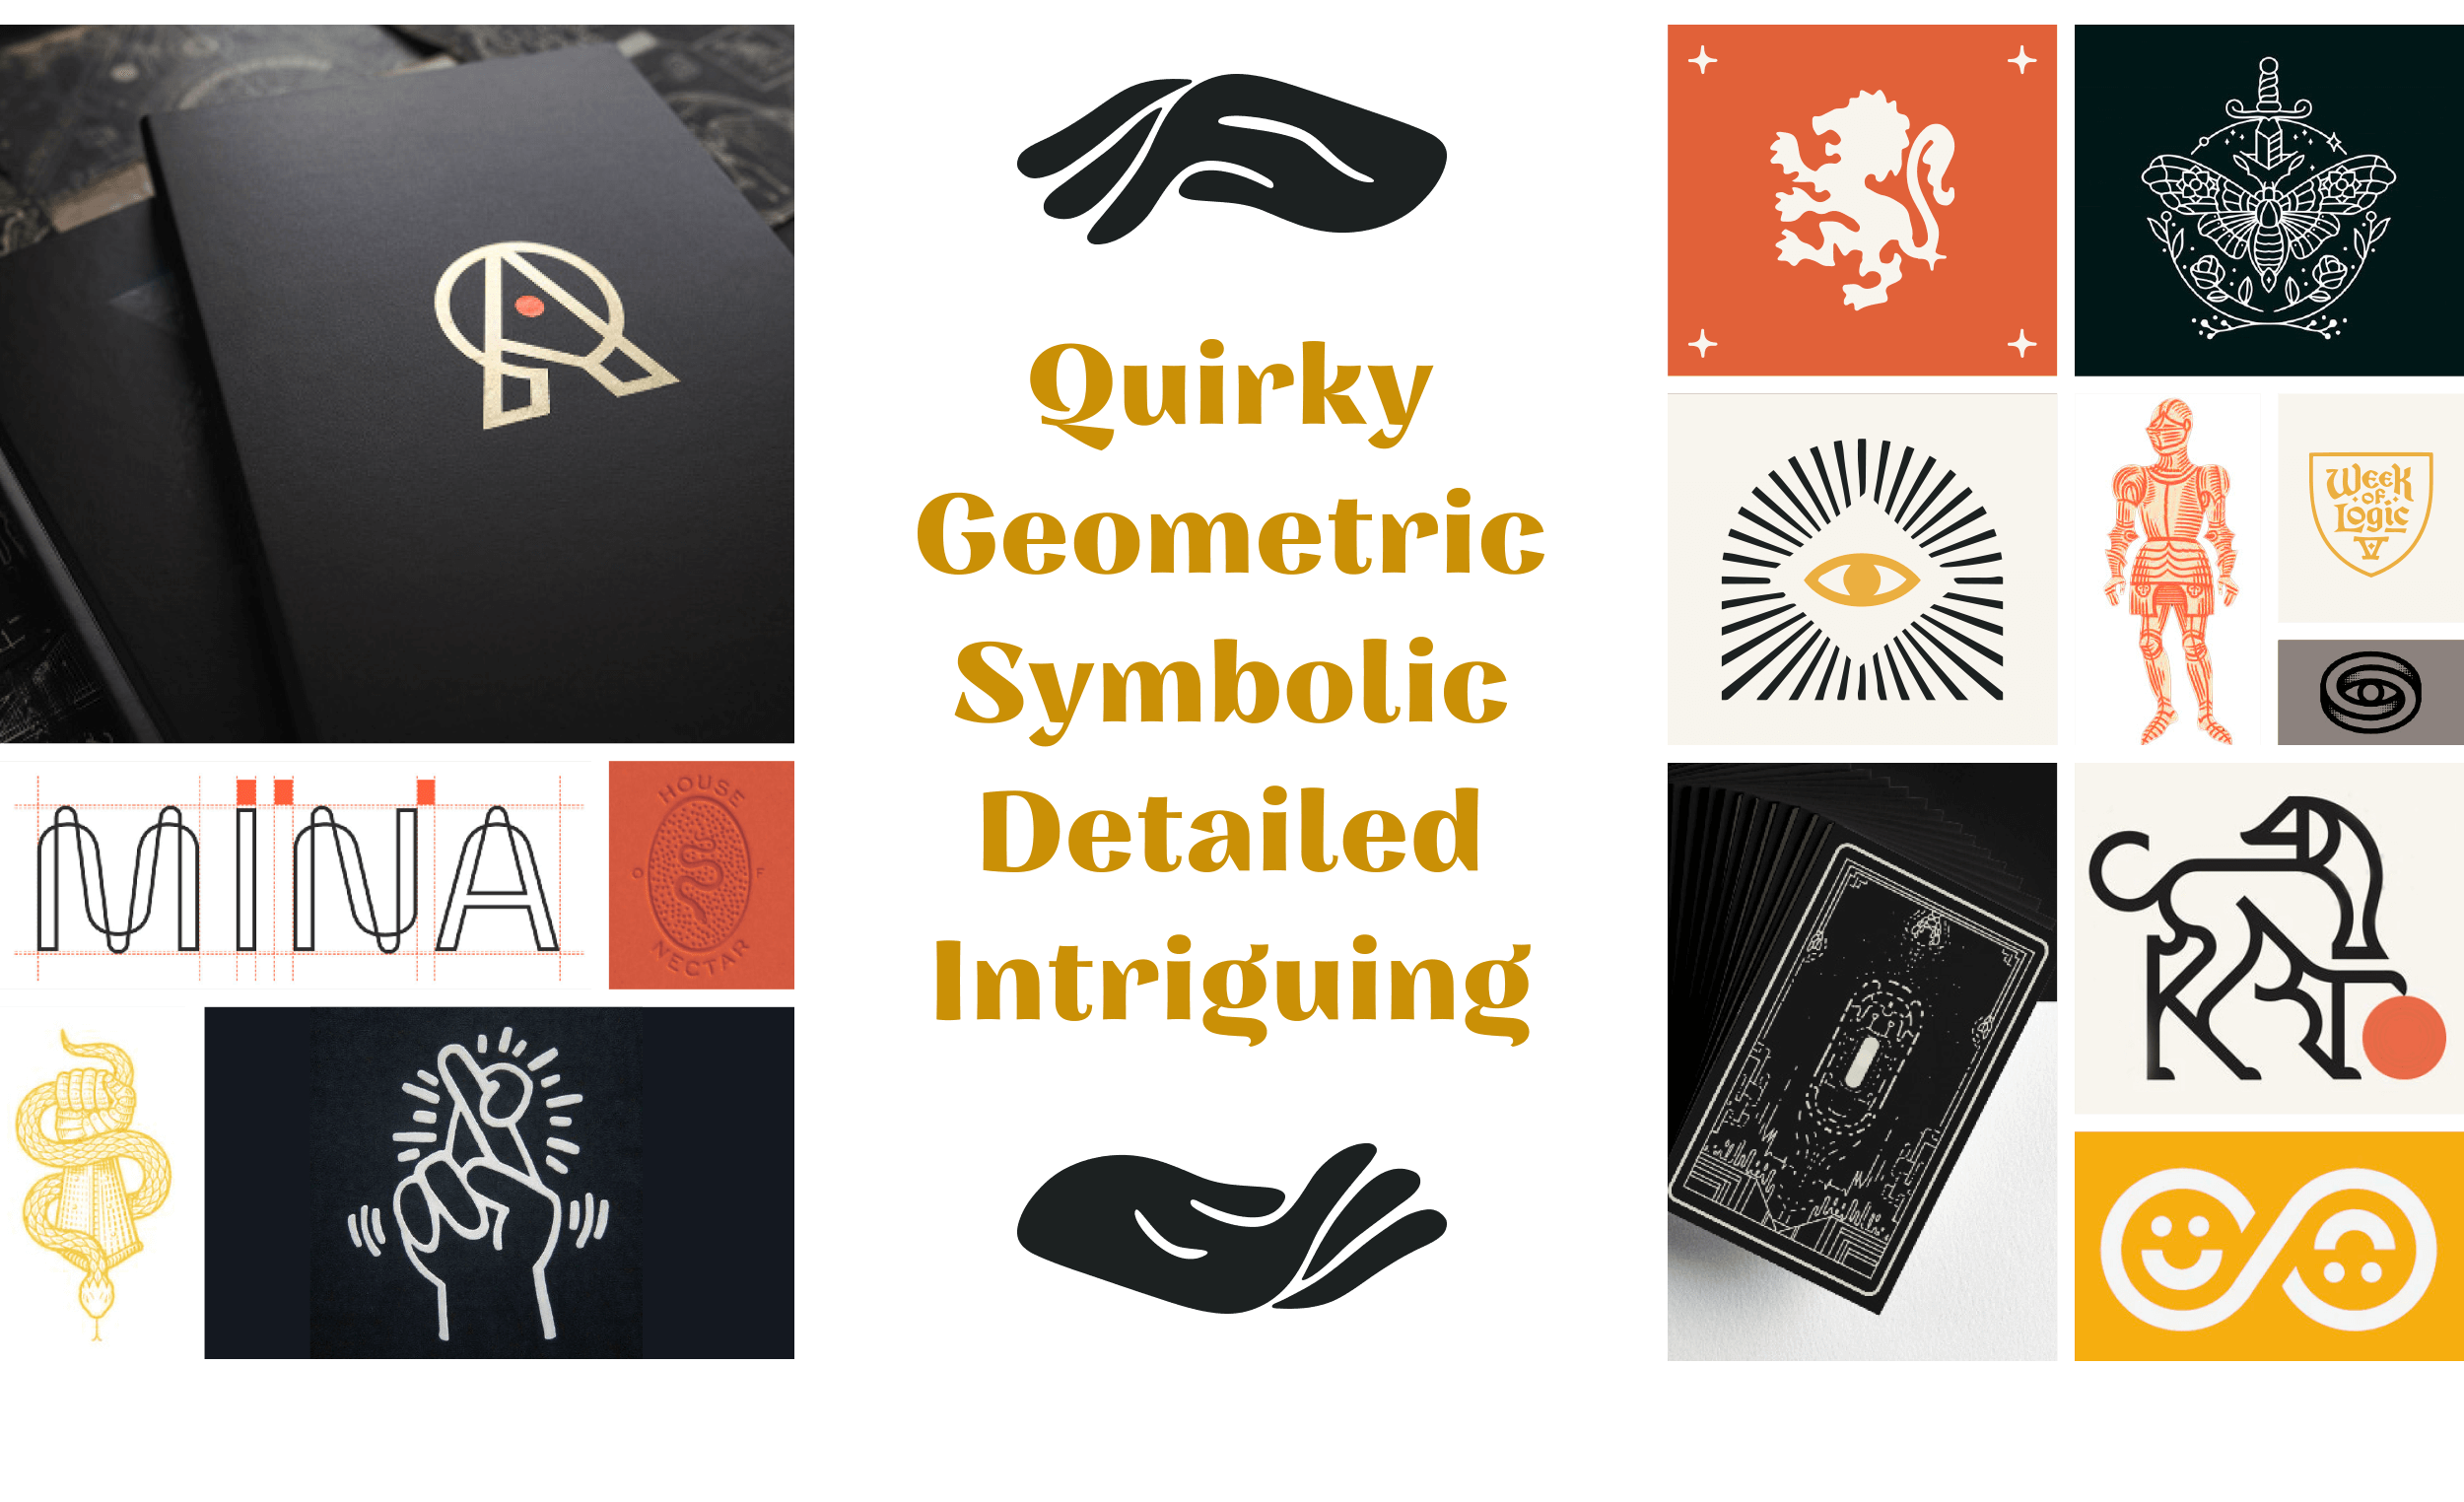 Moodboard of inspiration images with the hands from the icon separated to reveal the brand attributes of quirk, geometric, symbolic, detailed, intriguing